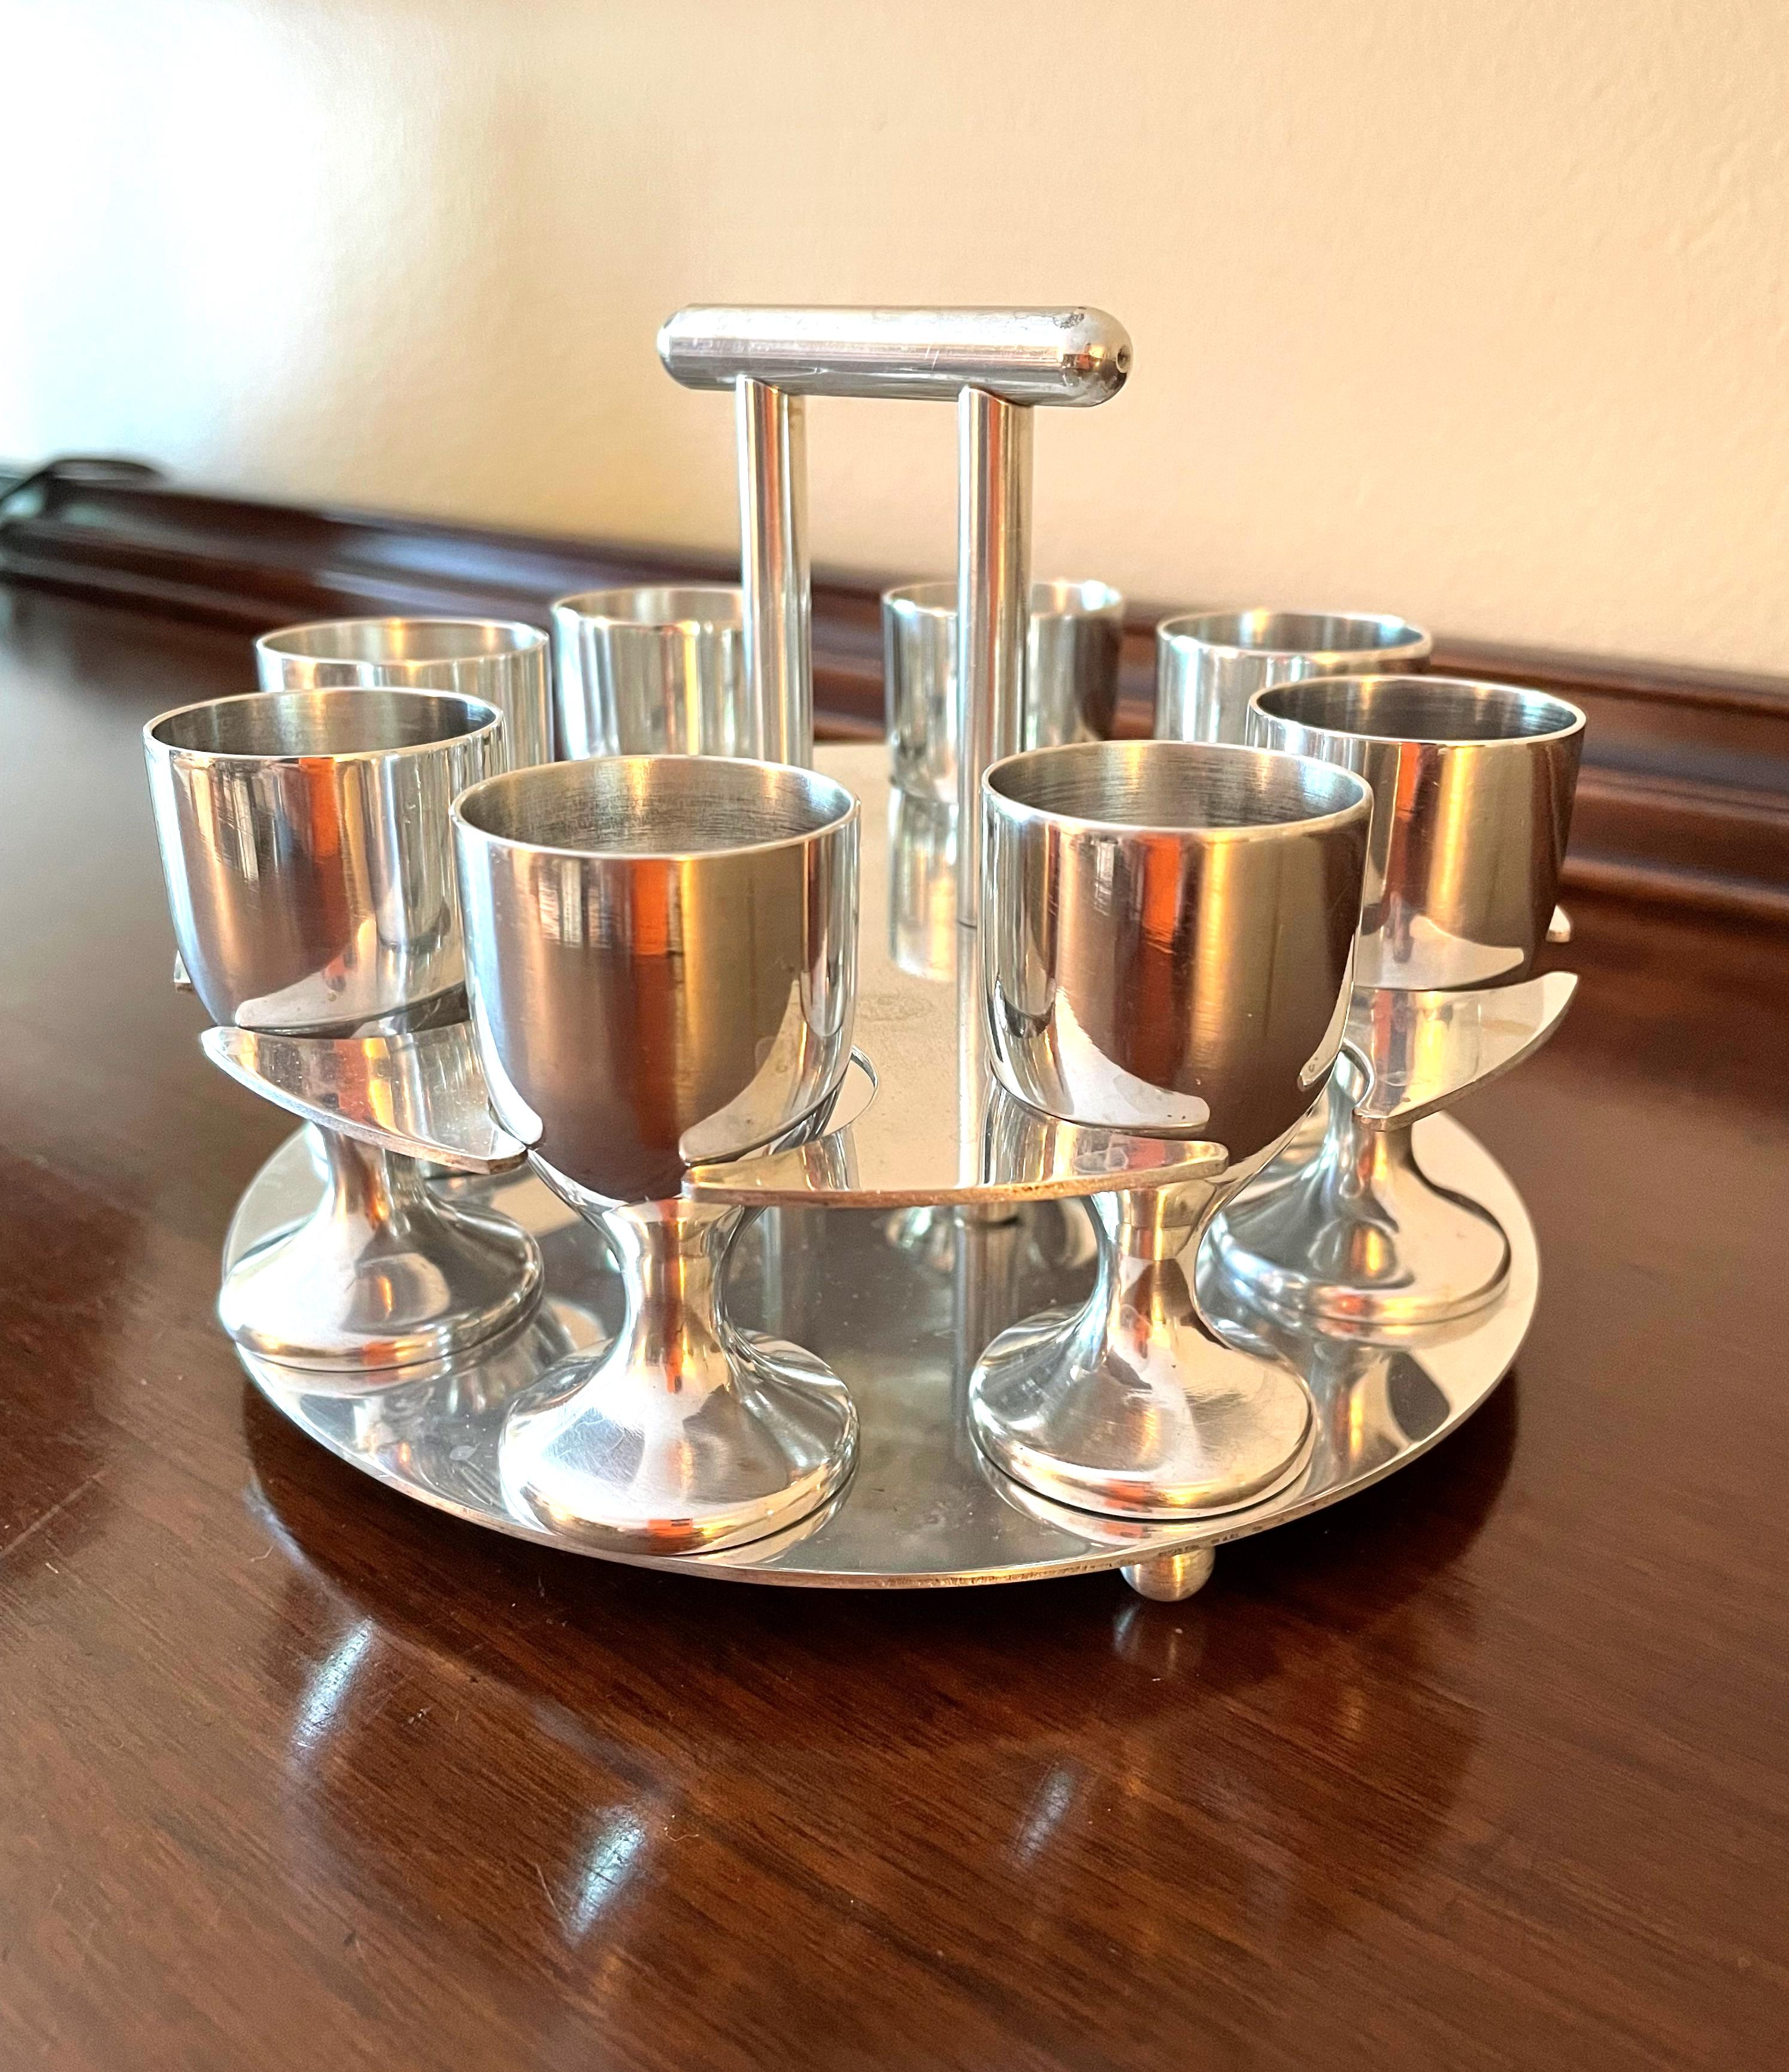 Mid-20th Century Stainless Steel Aperitifs / Cordials or Shot Glasses, Set of 8